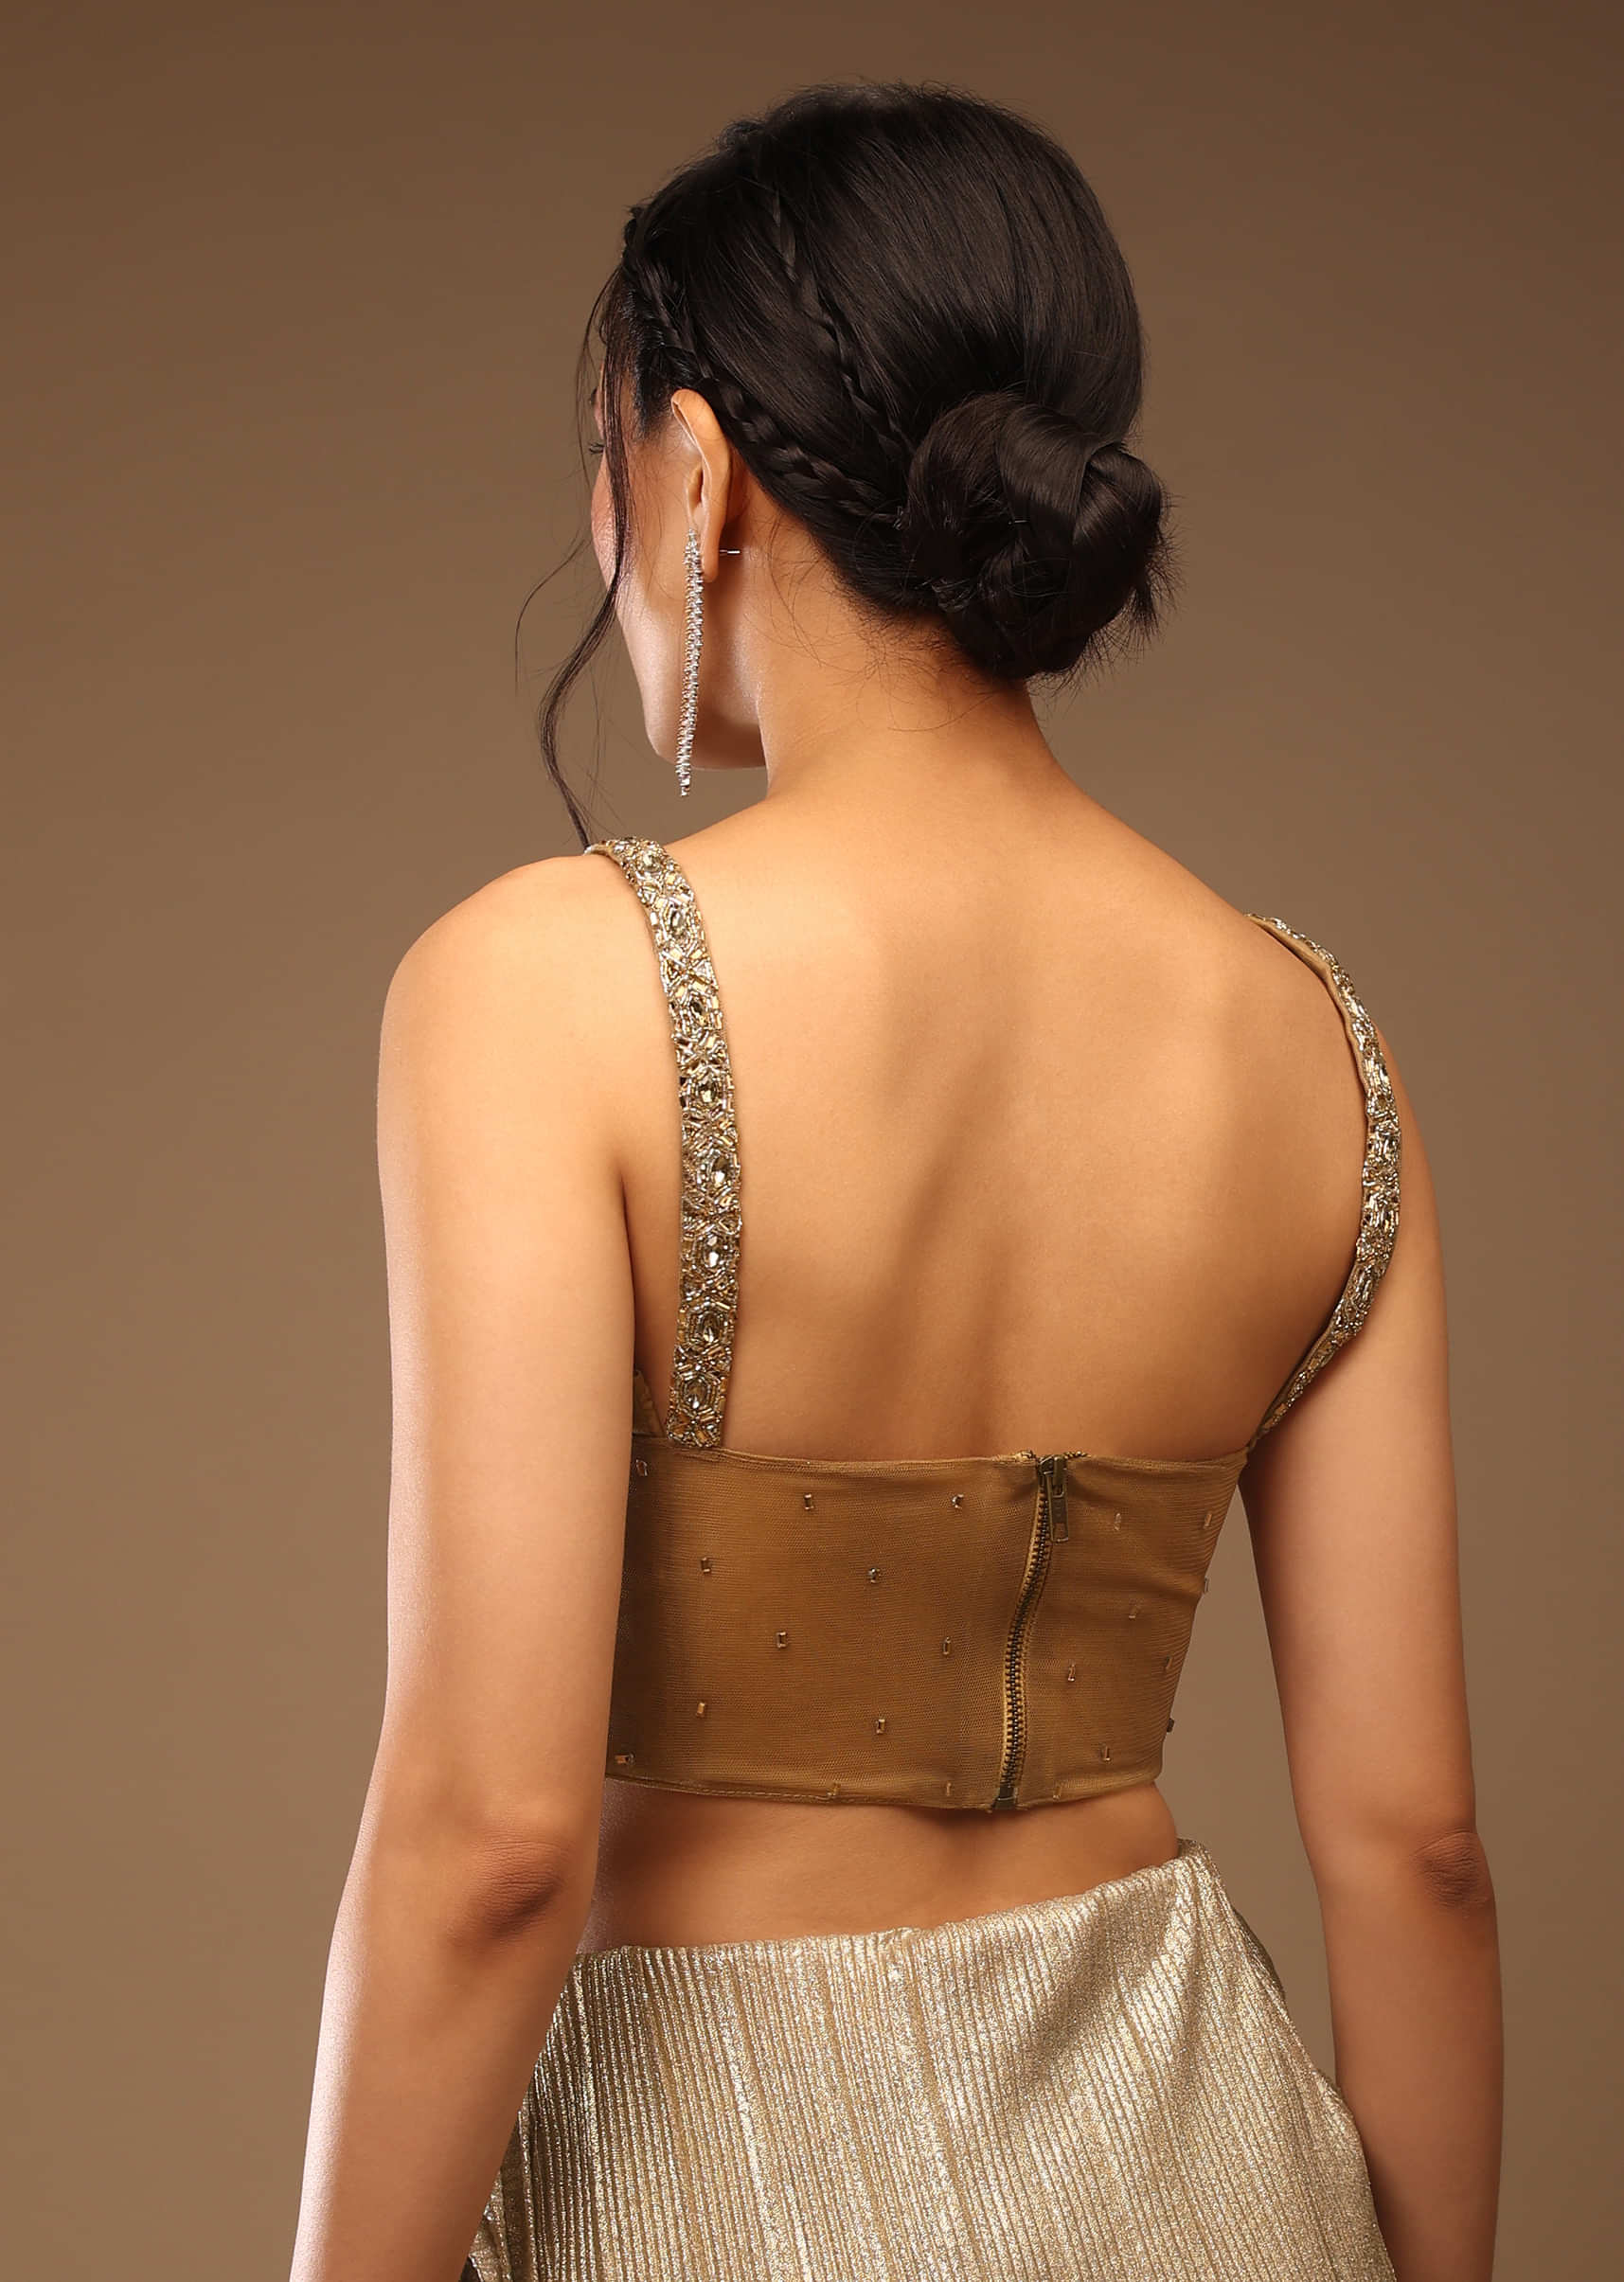 Champagne Beige Ready-Pleated Saree With A Crop Top In Stones Embellishment